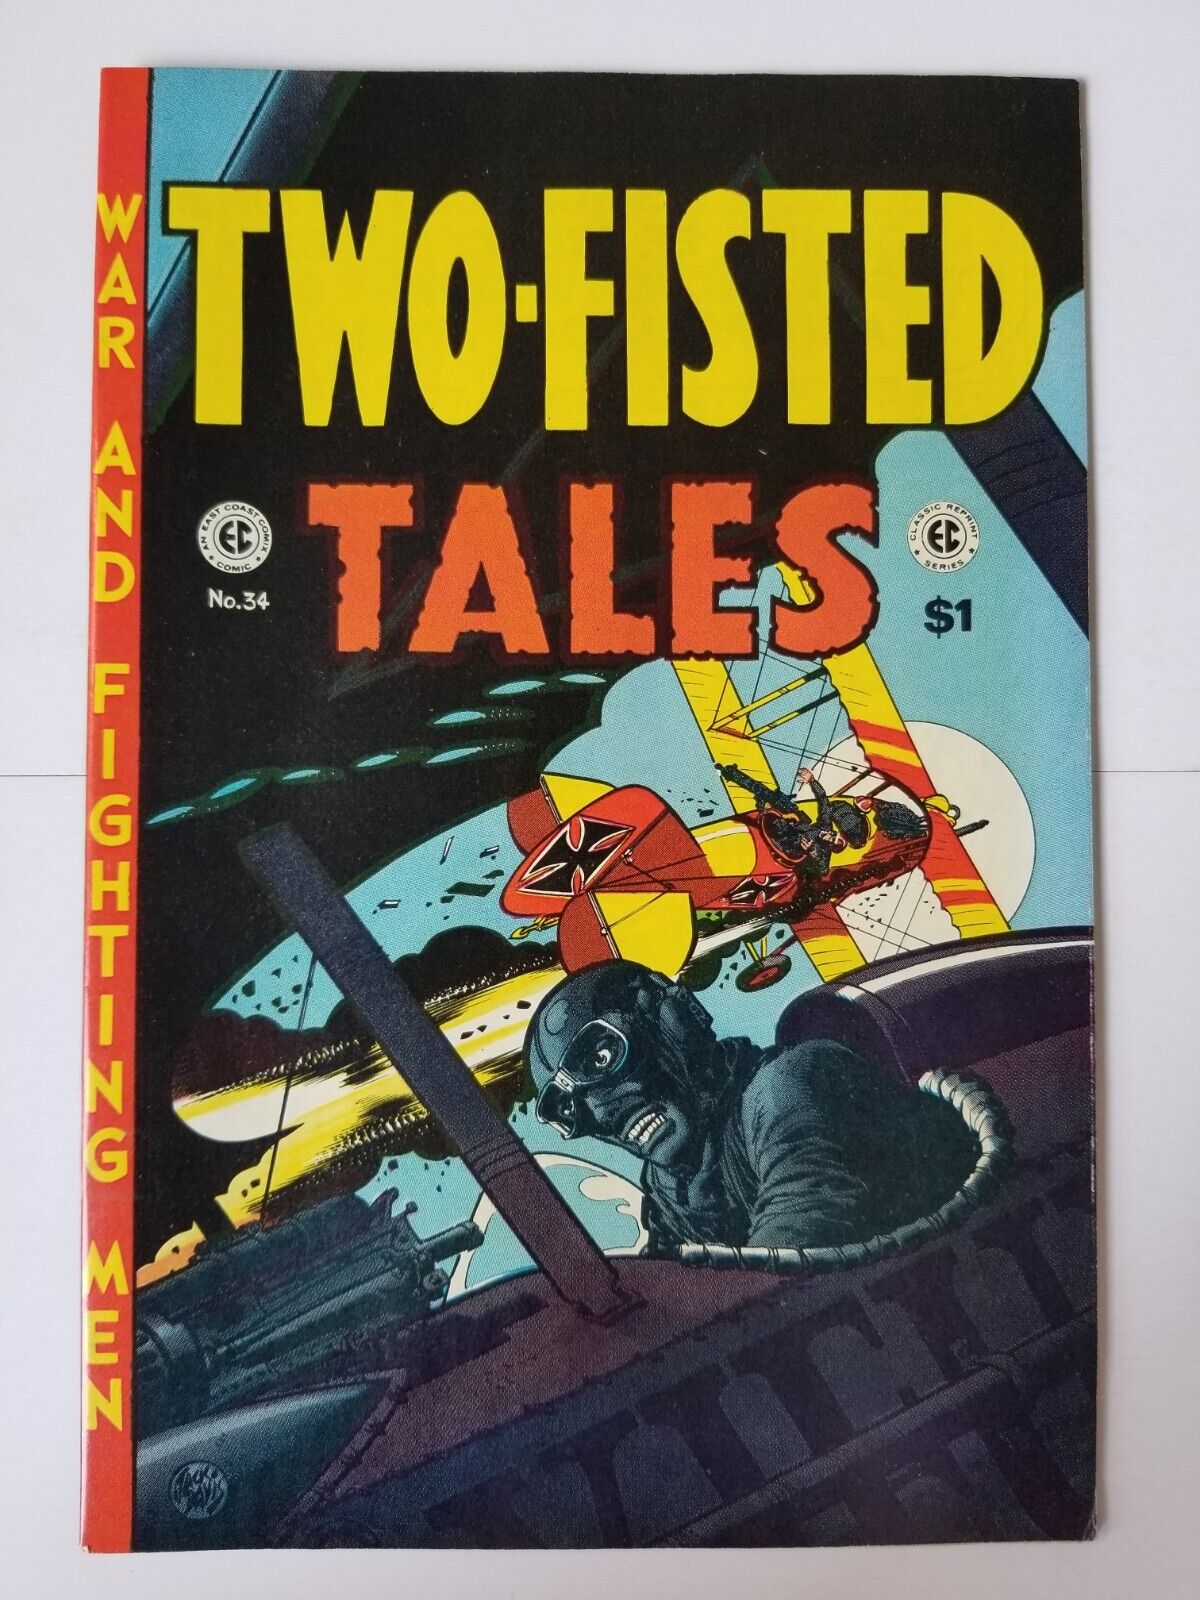 EC Classic Reprints issue #9 VF/NM (1973, East Coast Comix) Two-Fisted Tales #34